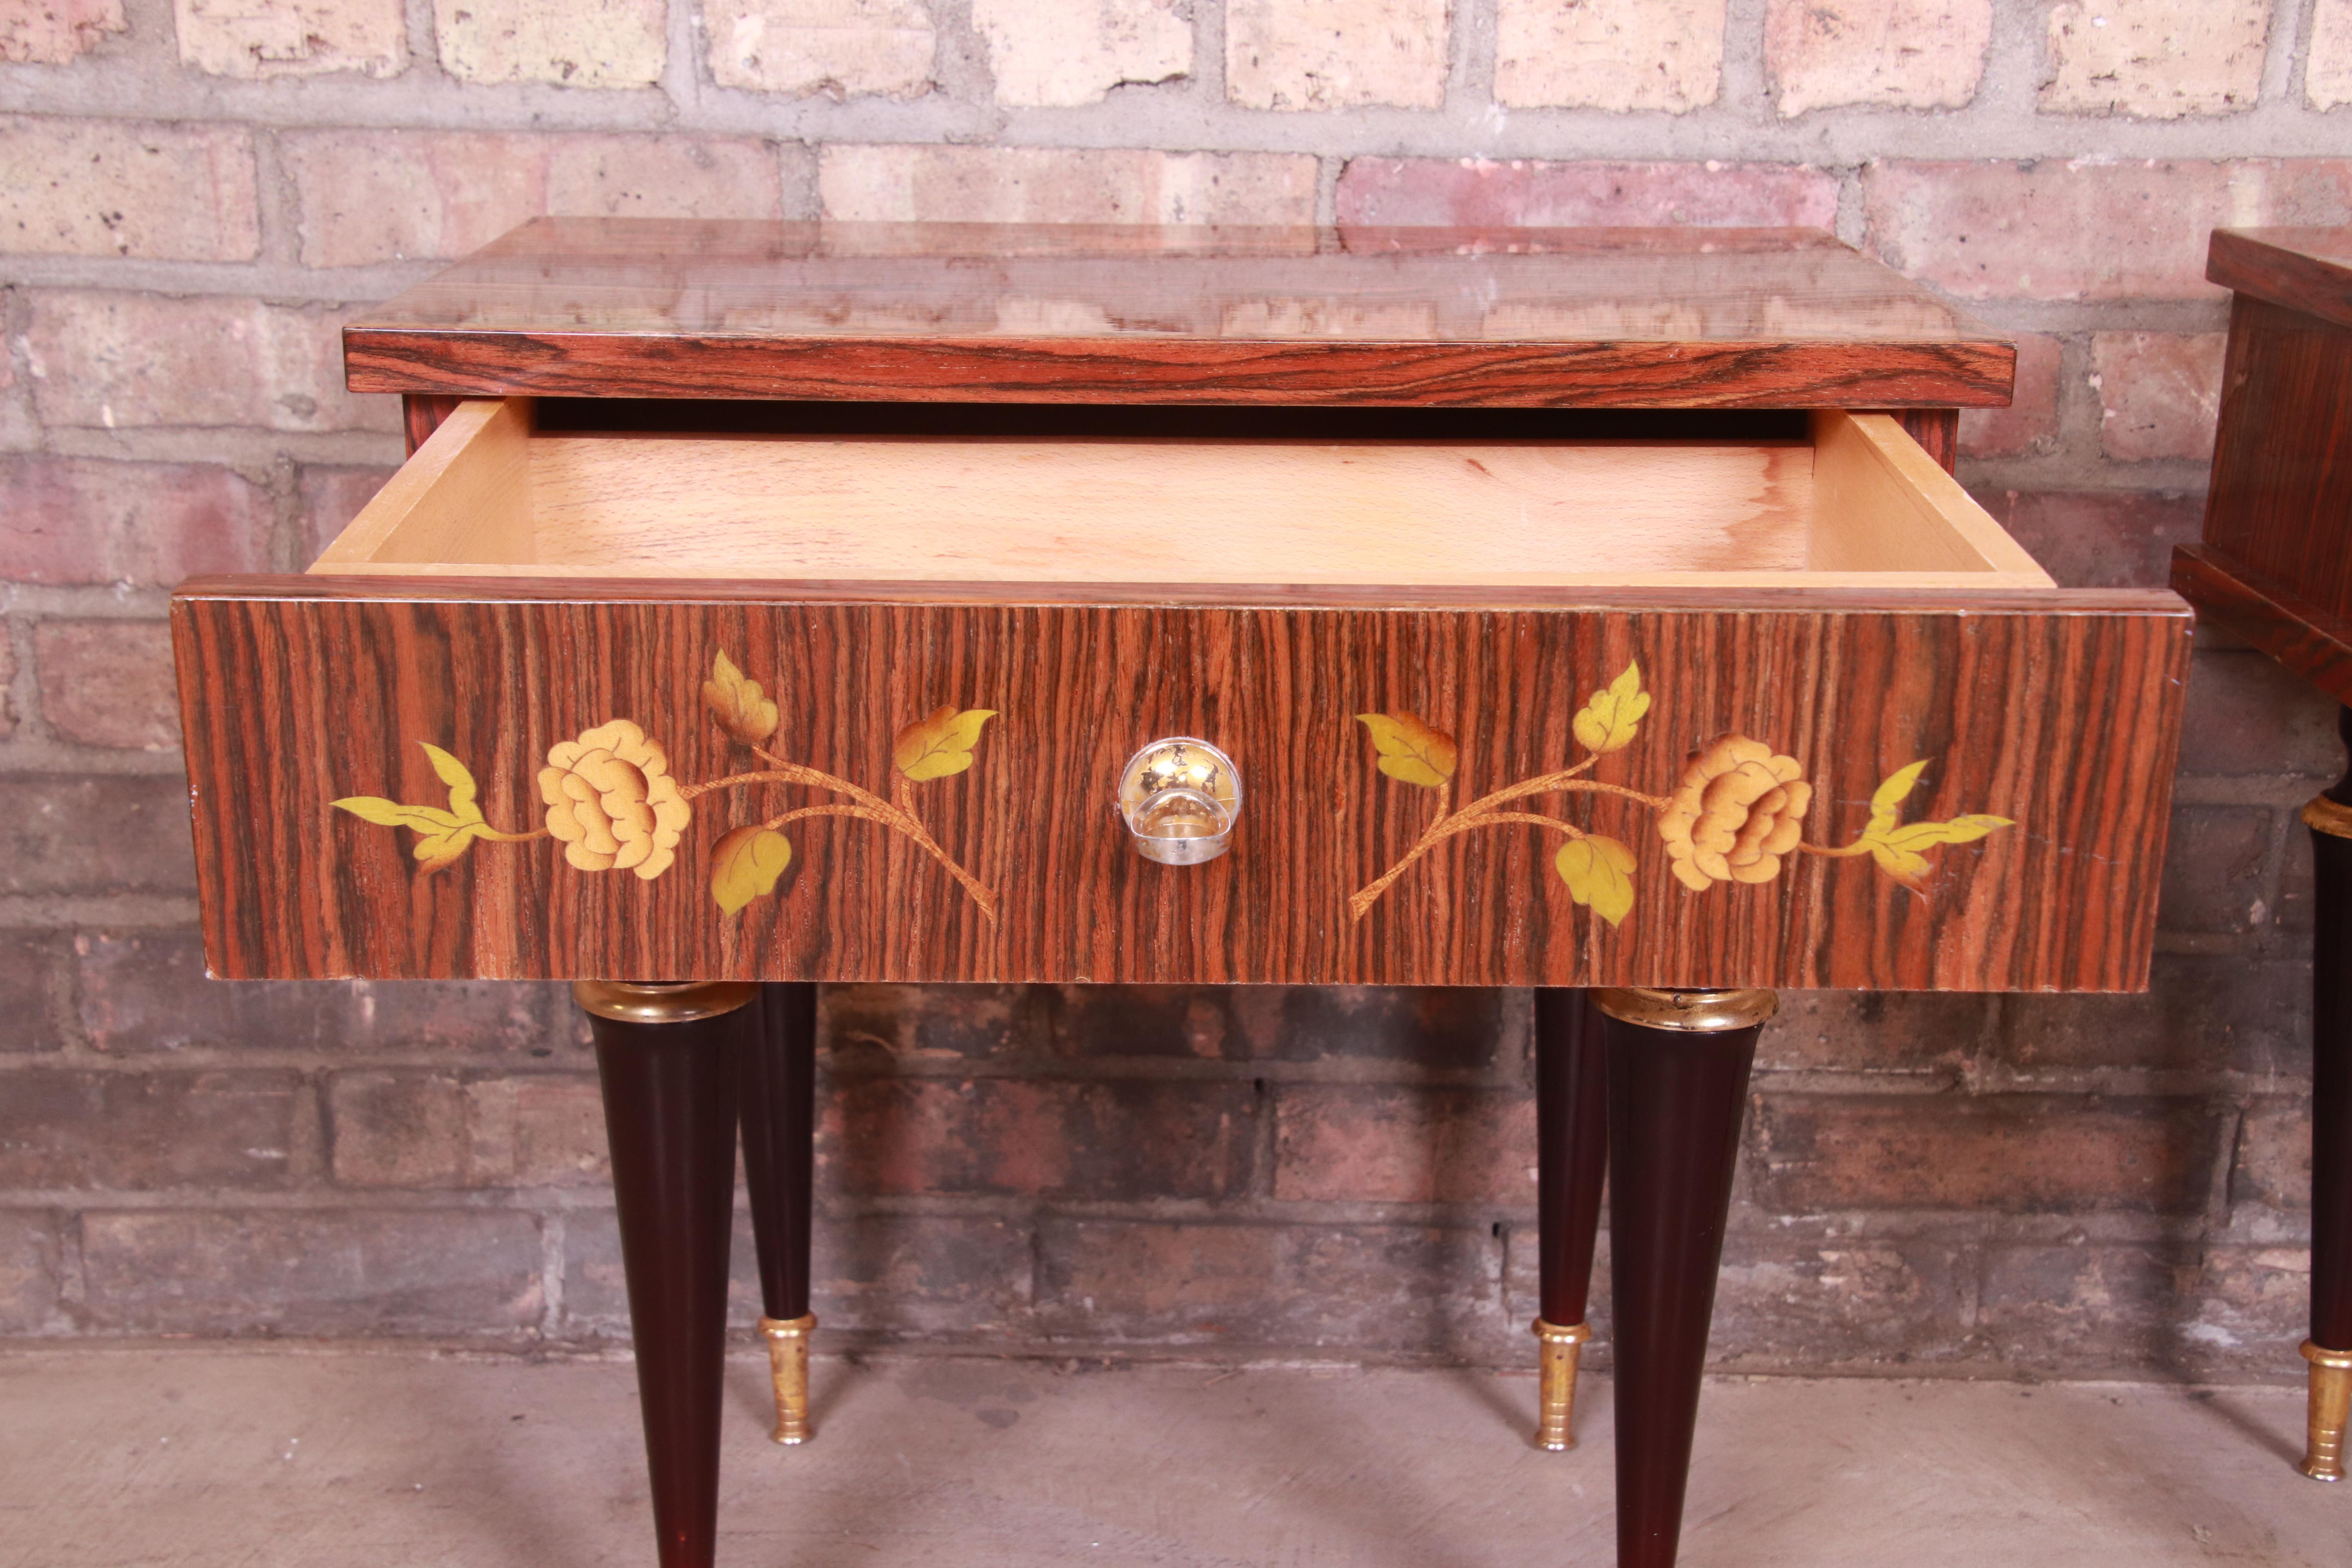 French Art Deco Macassar Ebony Inlaid Marquetry Nightstands, Circa 1950s For Sale 4